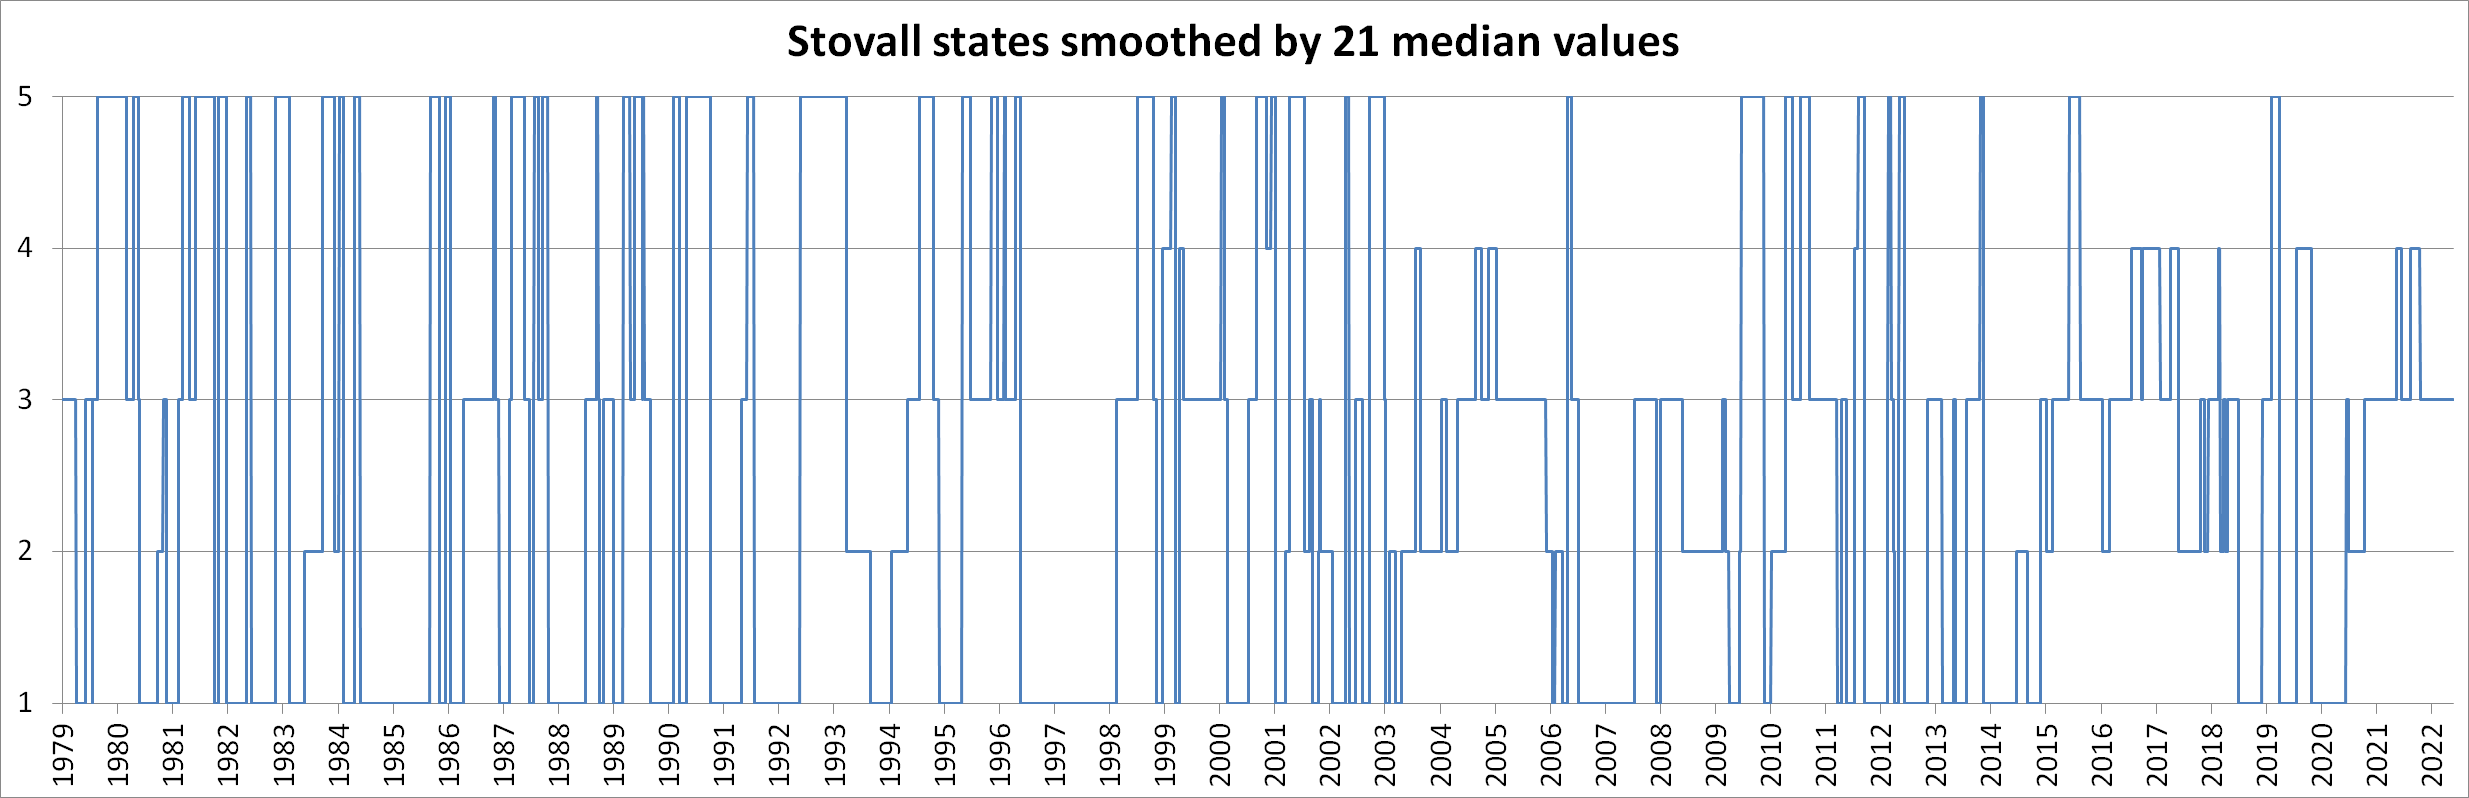 Stoval states smoothed by 21 median values